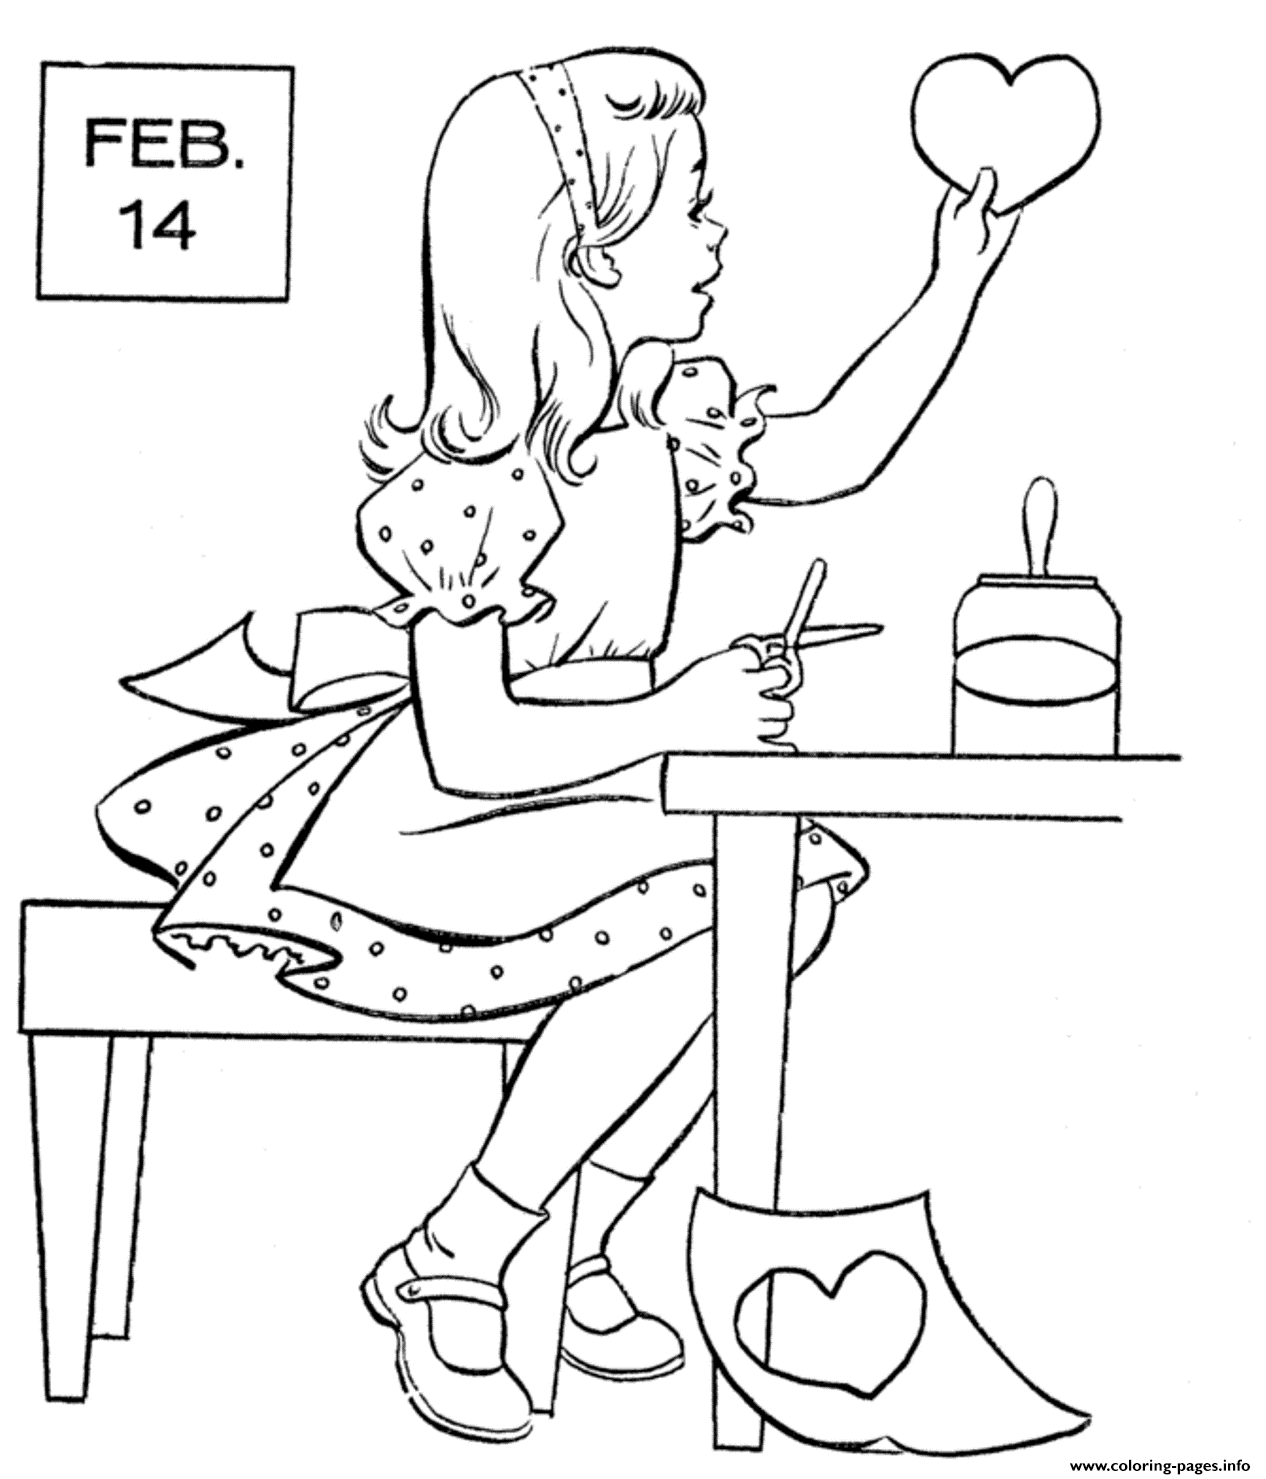 14 February Valentines S16997 coloring